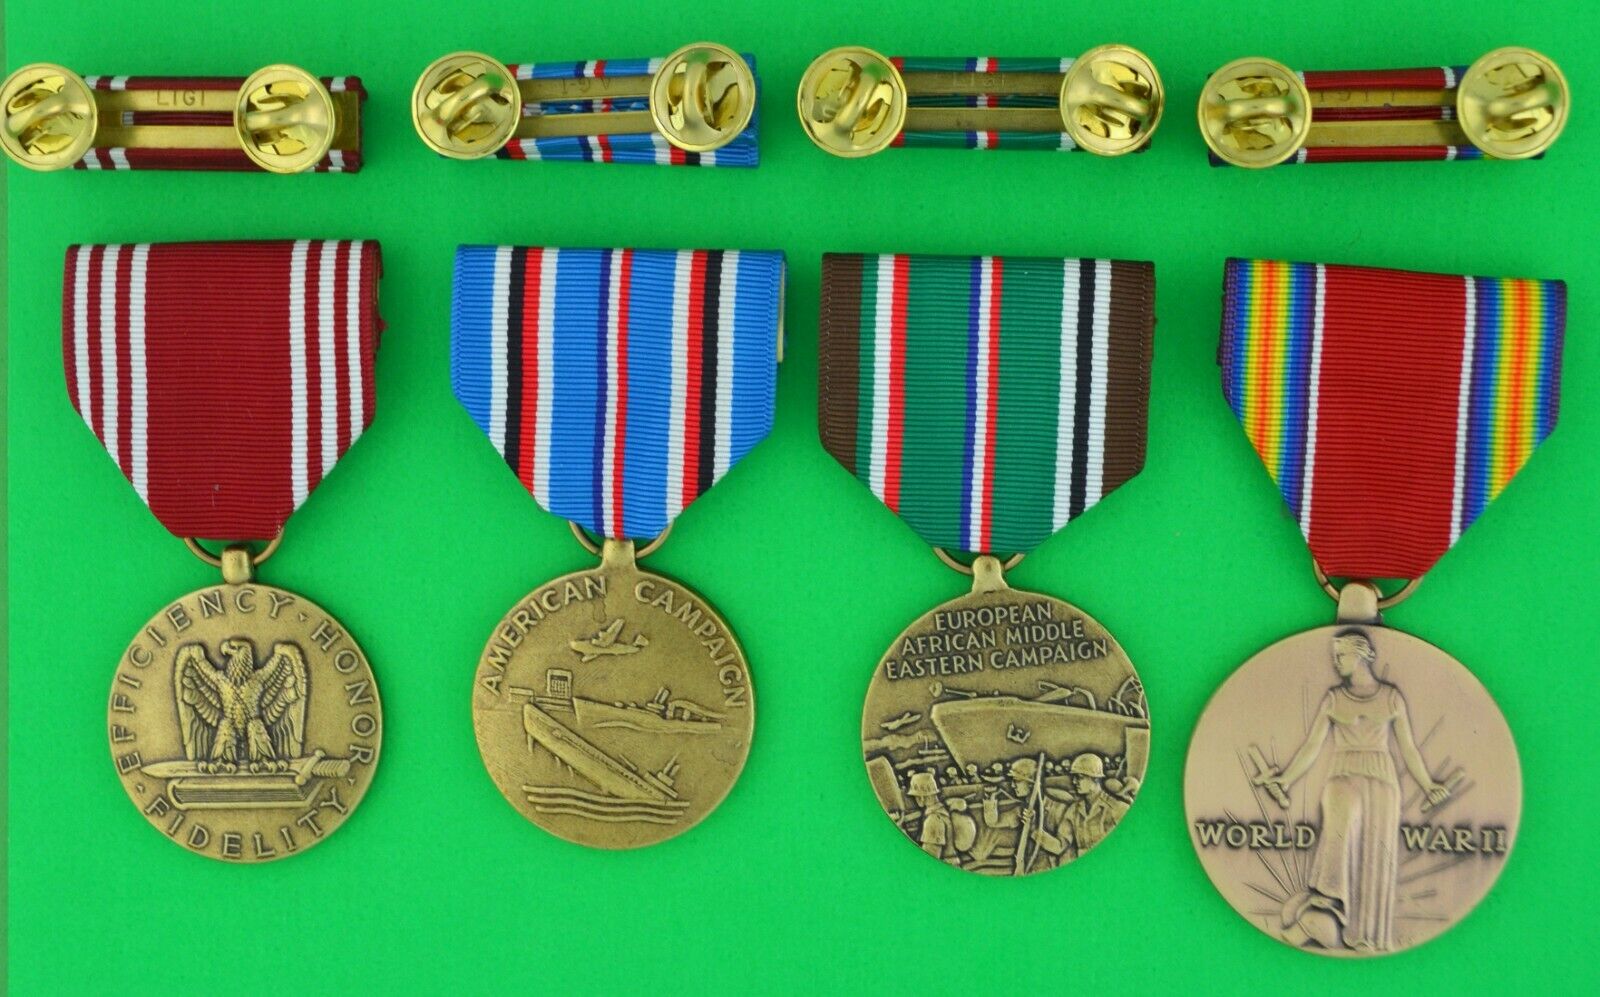 4 WWII Army Medals & Ribbon Bars for Service in Europe Campaign (ETO)